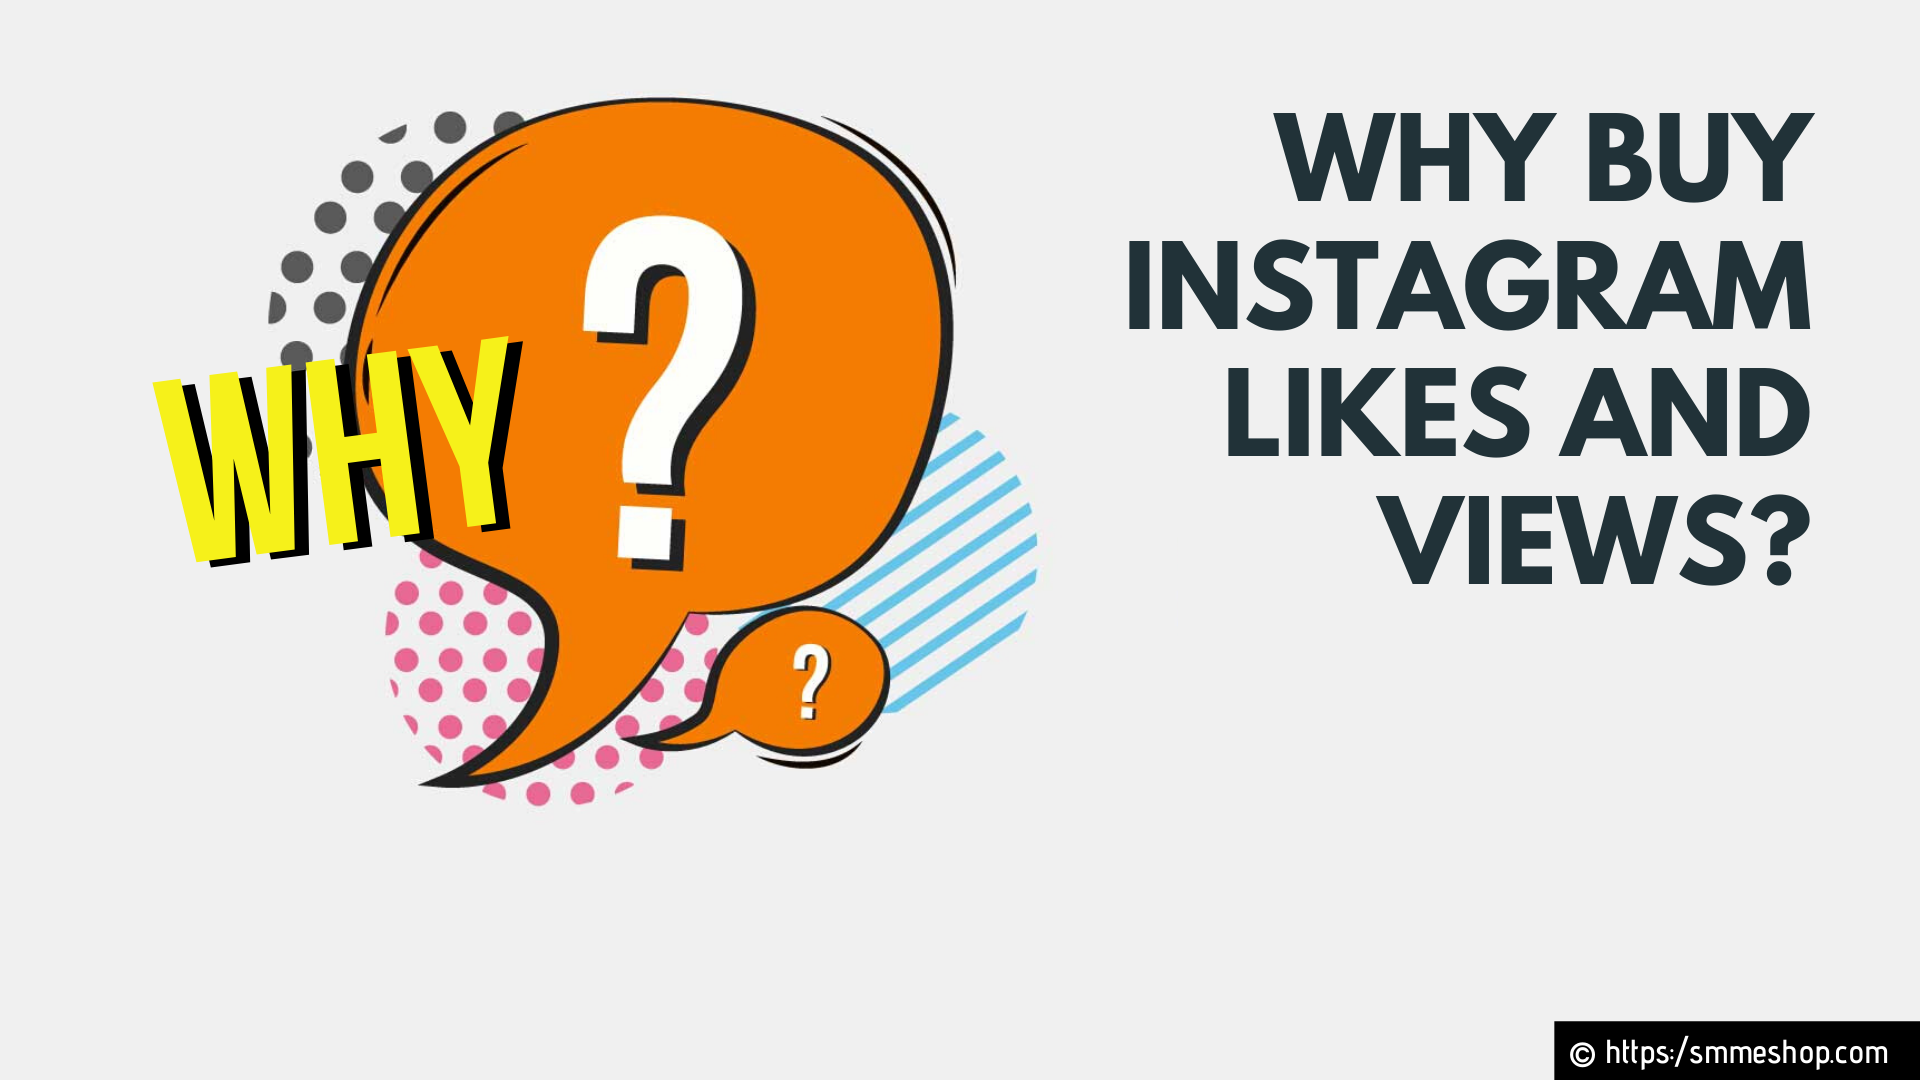 Why Buy Instagram Likes and Views?